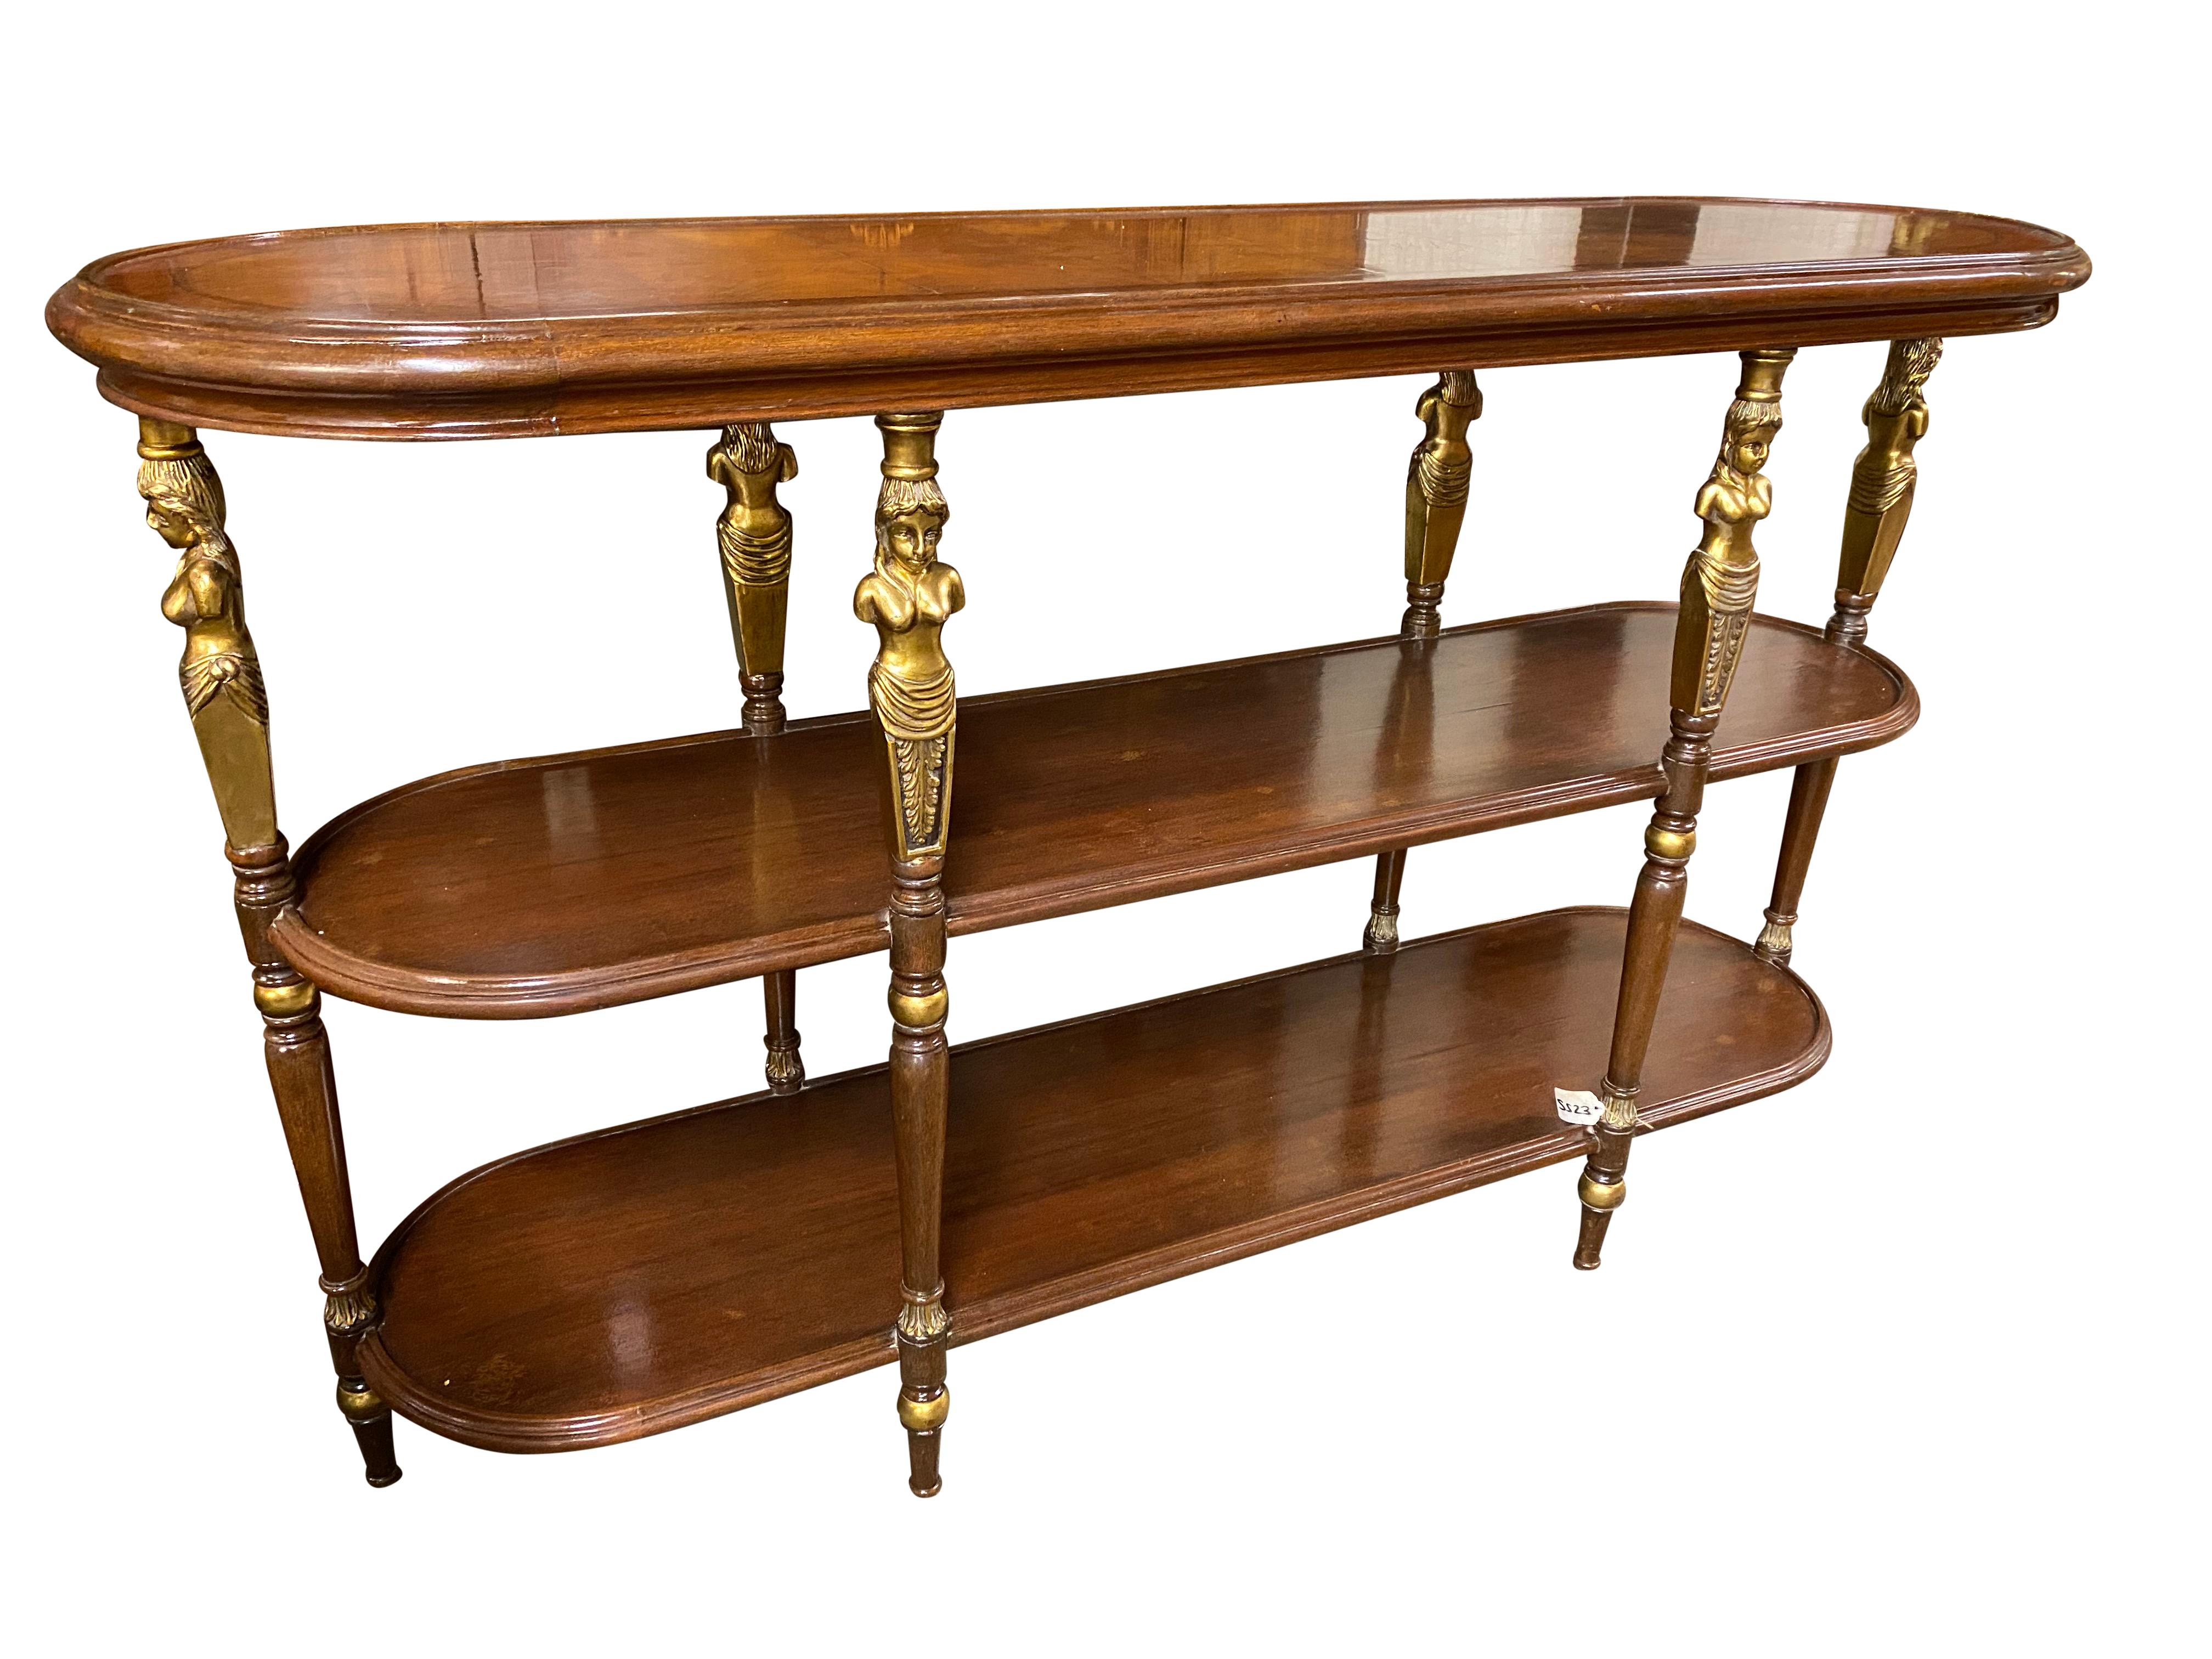 20th Century French Empire Style Open Bookcase/Etagere Tiered Table In Excellent Condition For Sale In Southall, GB